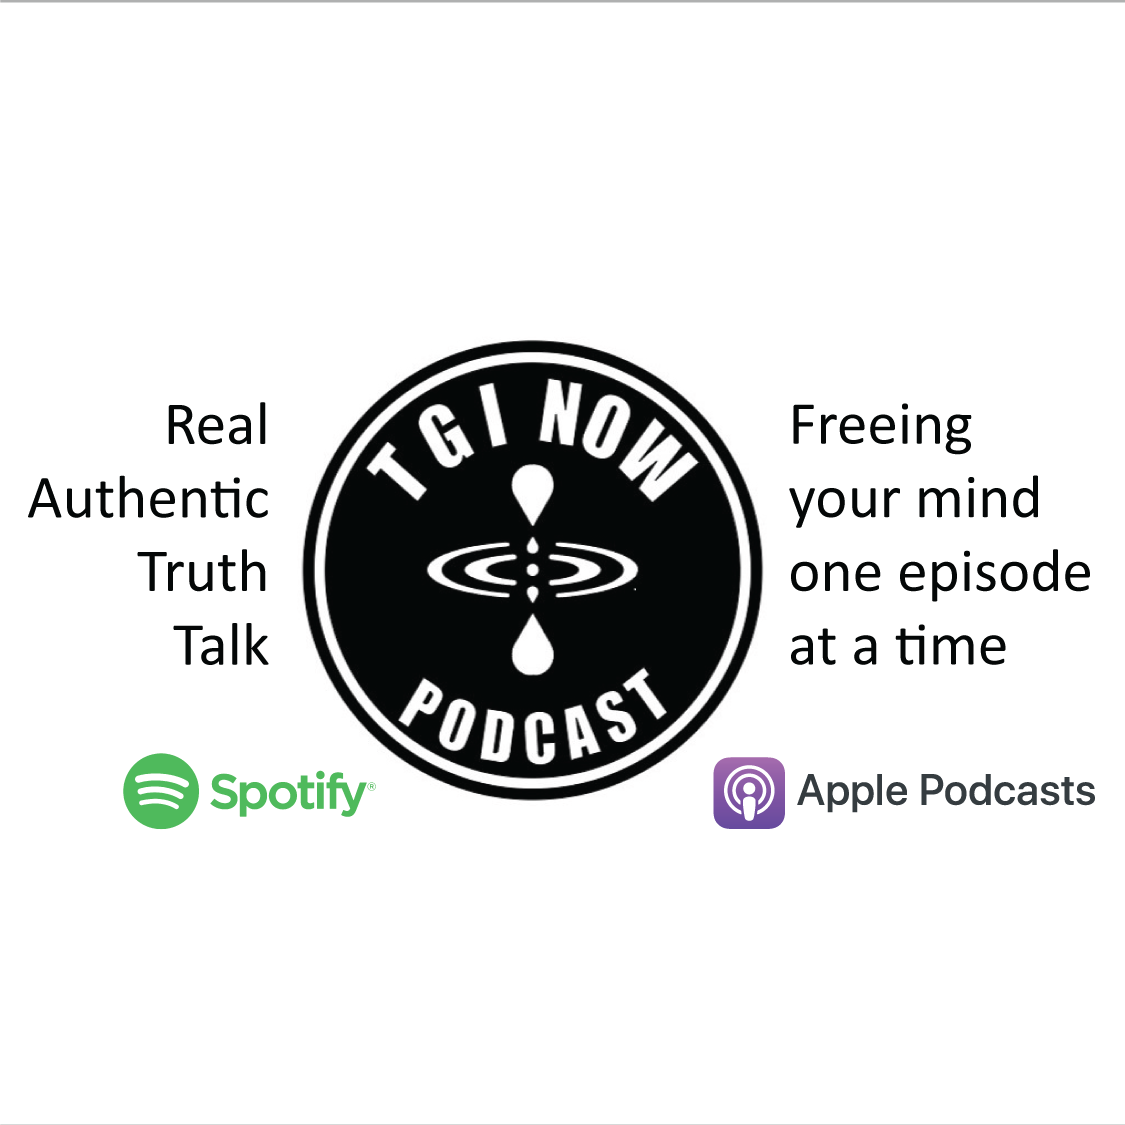 TGI Now Podcast Real Authentic Truth Talk. Freeing your mind one episode at a time